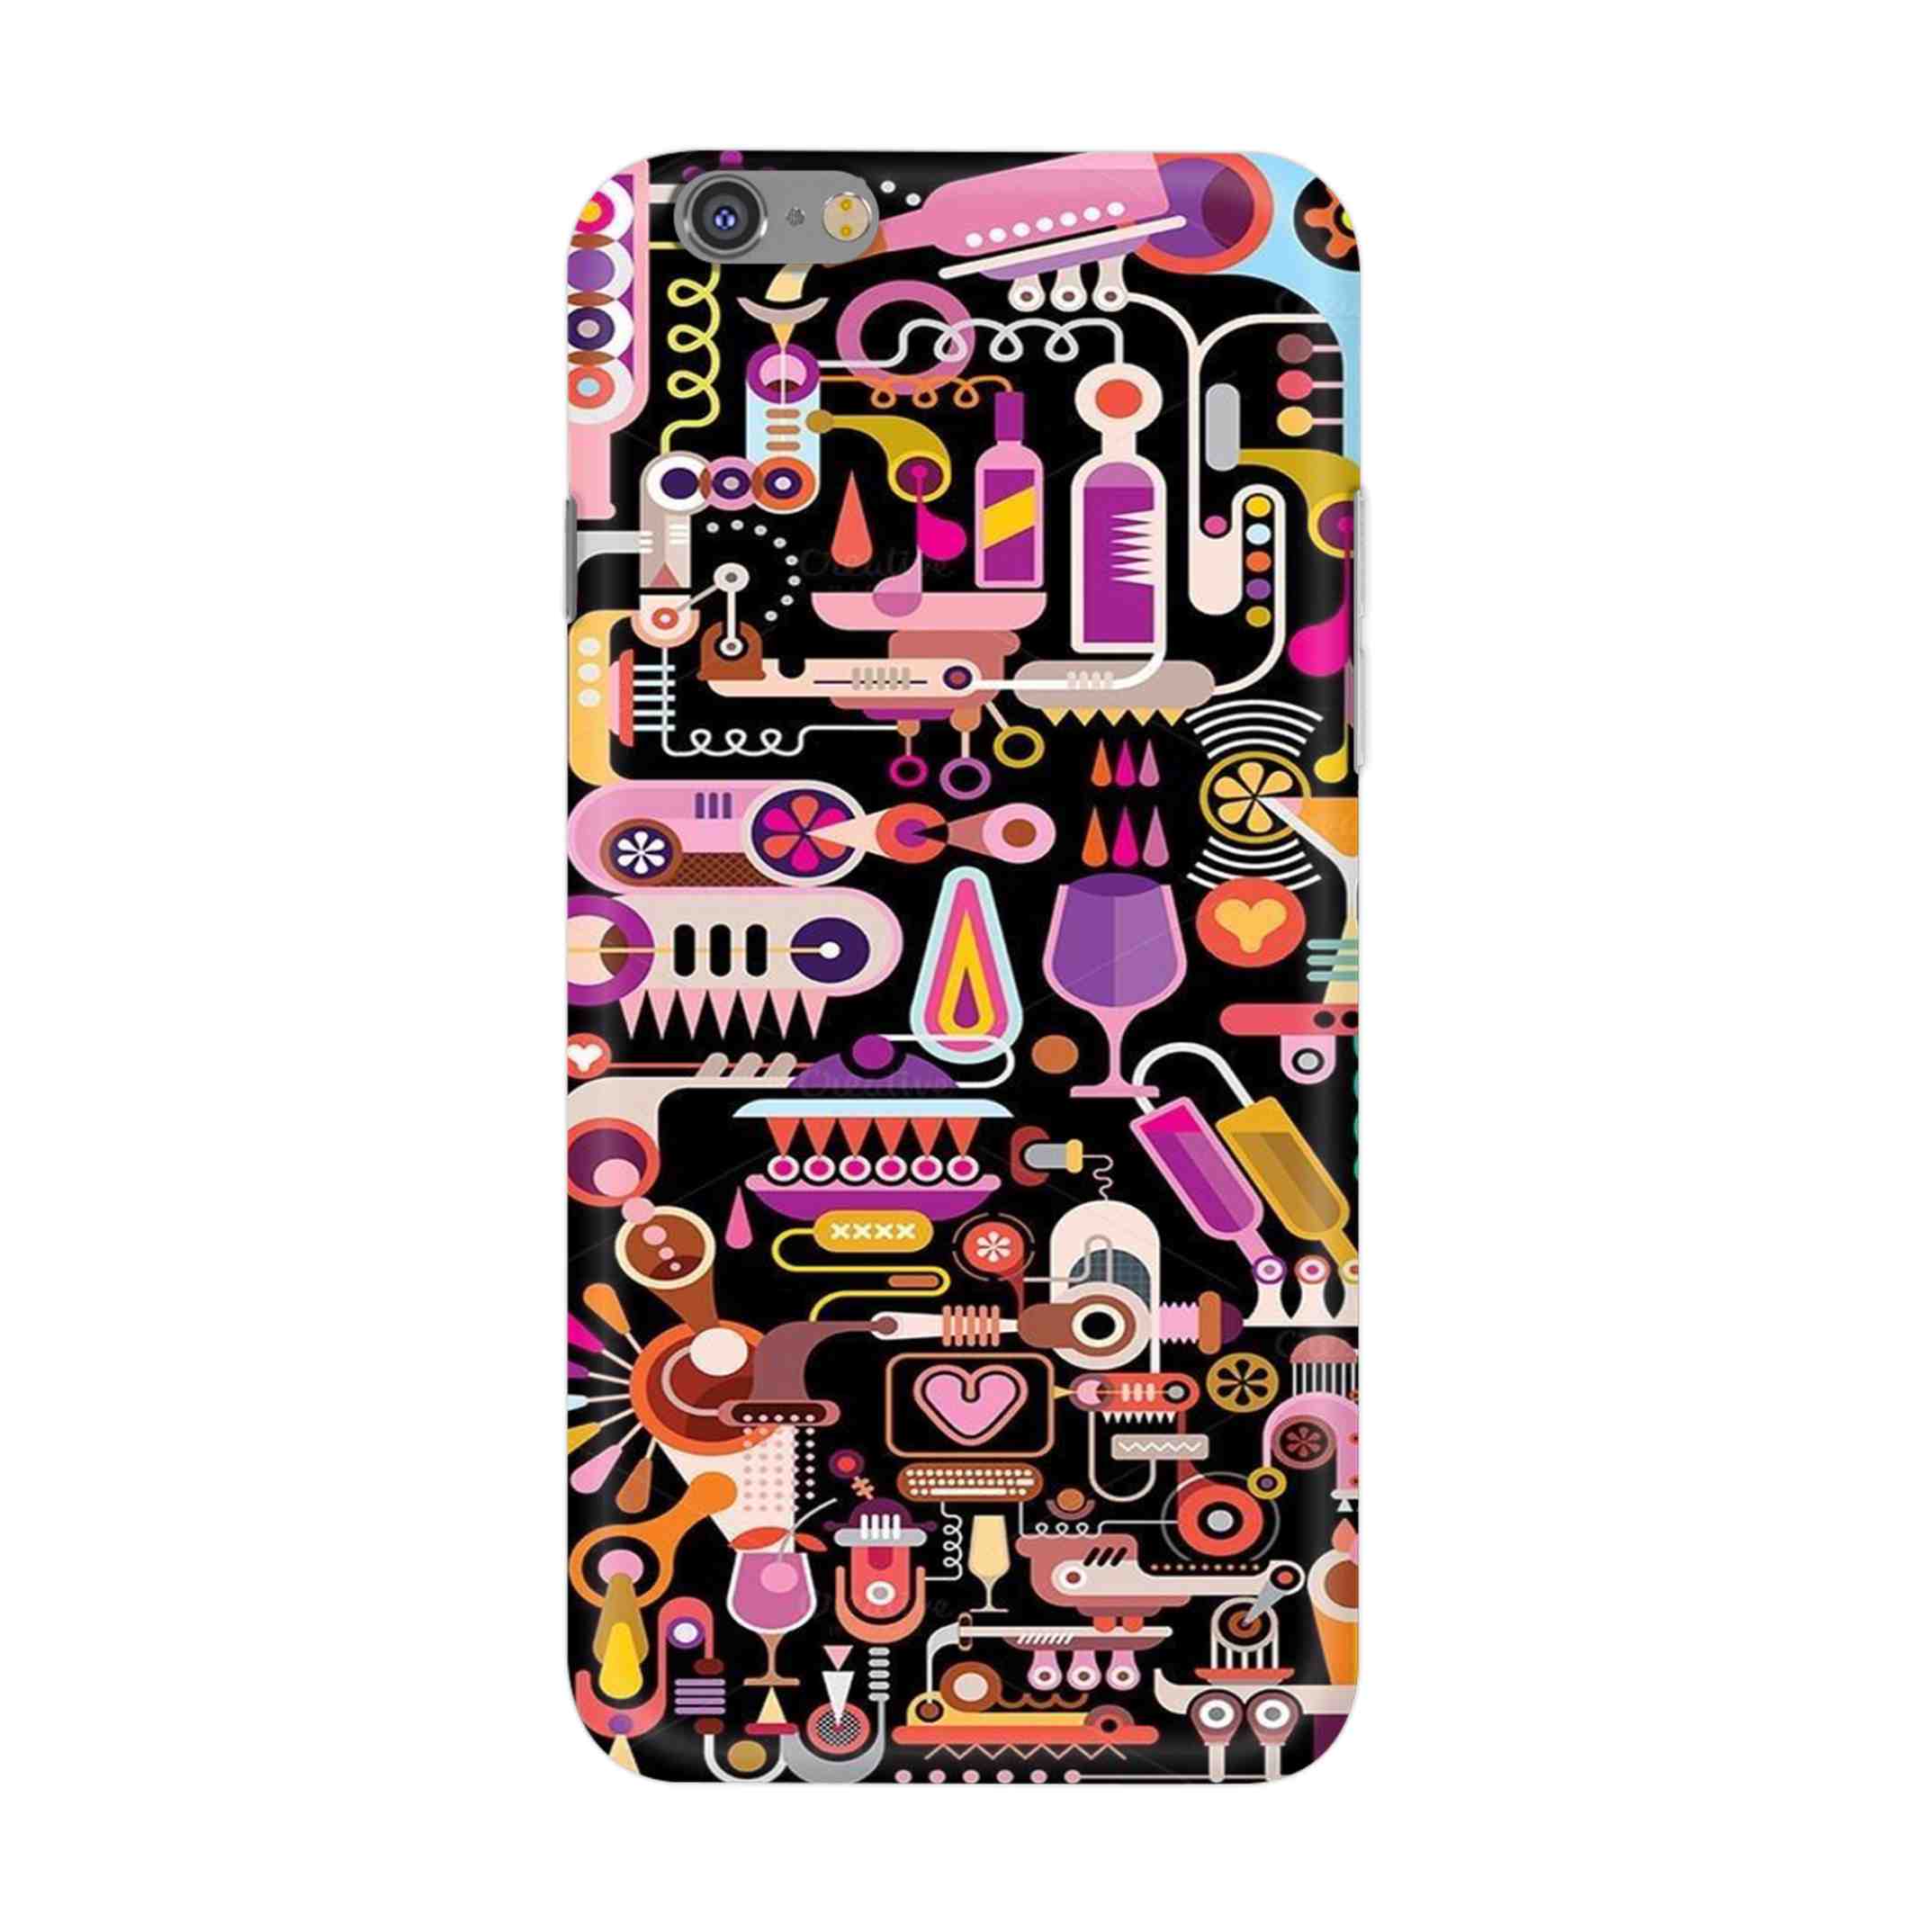 Buy Art Hard Back Mobile Phone Case/Cover For iPhone 6 Plus / 6s Plus Online